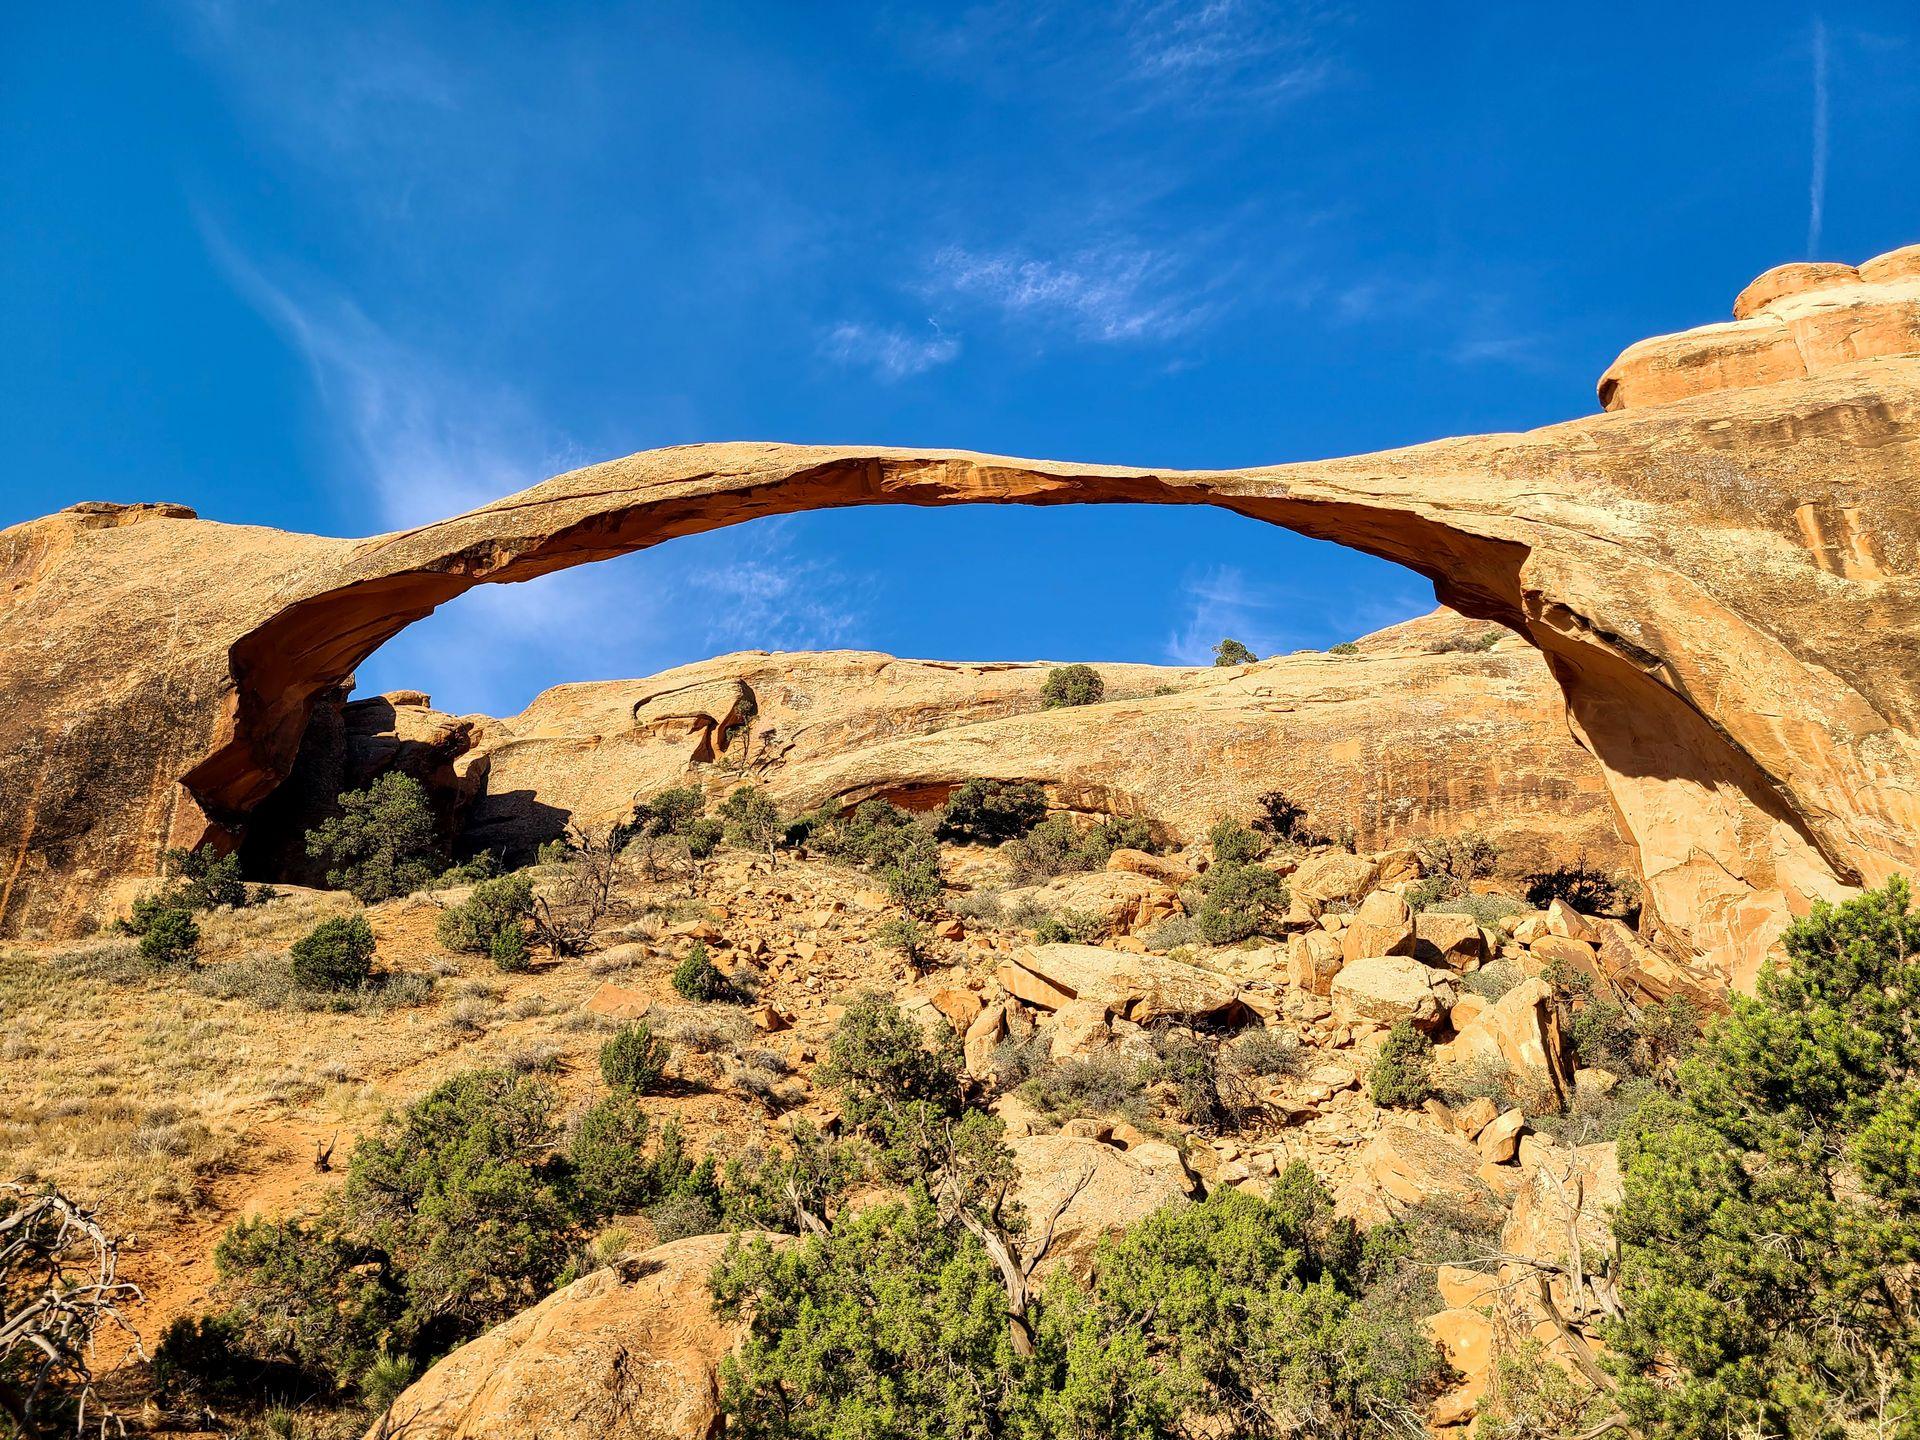 A huge, narrow arch called Landscape Arch in Arches National Park